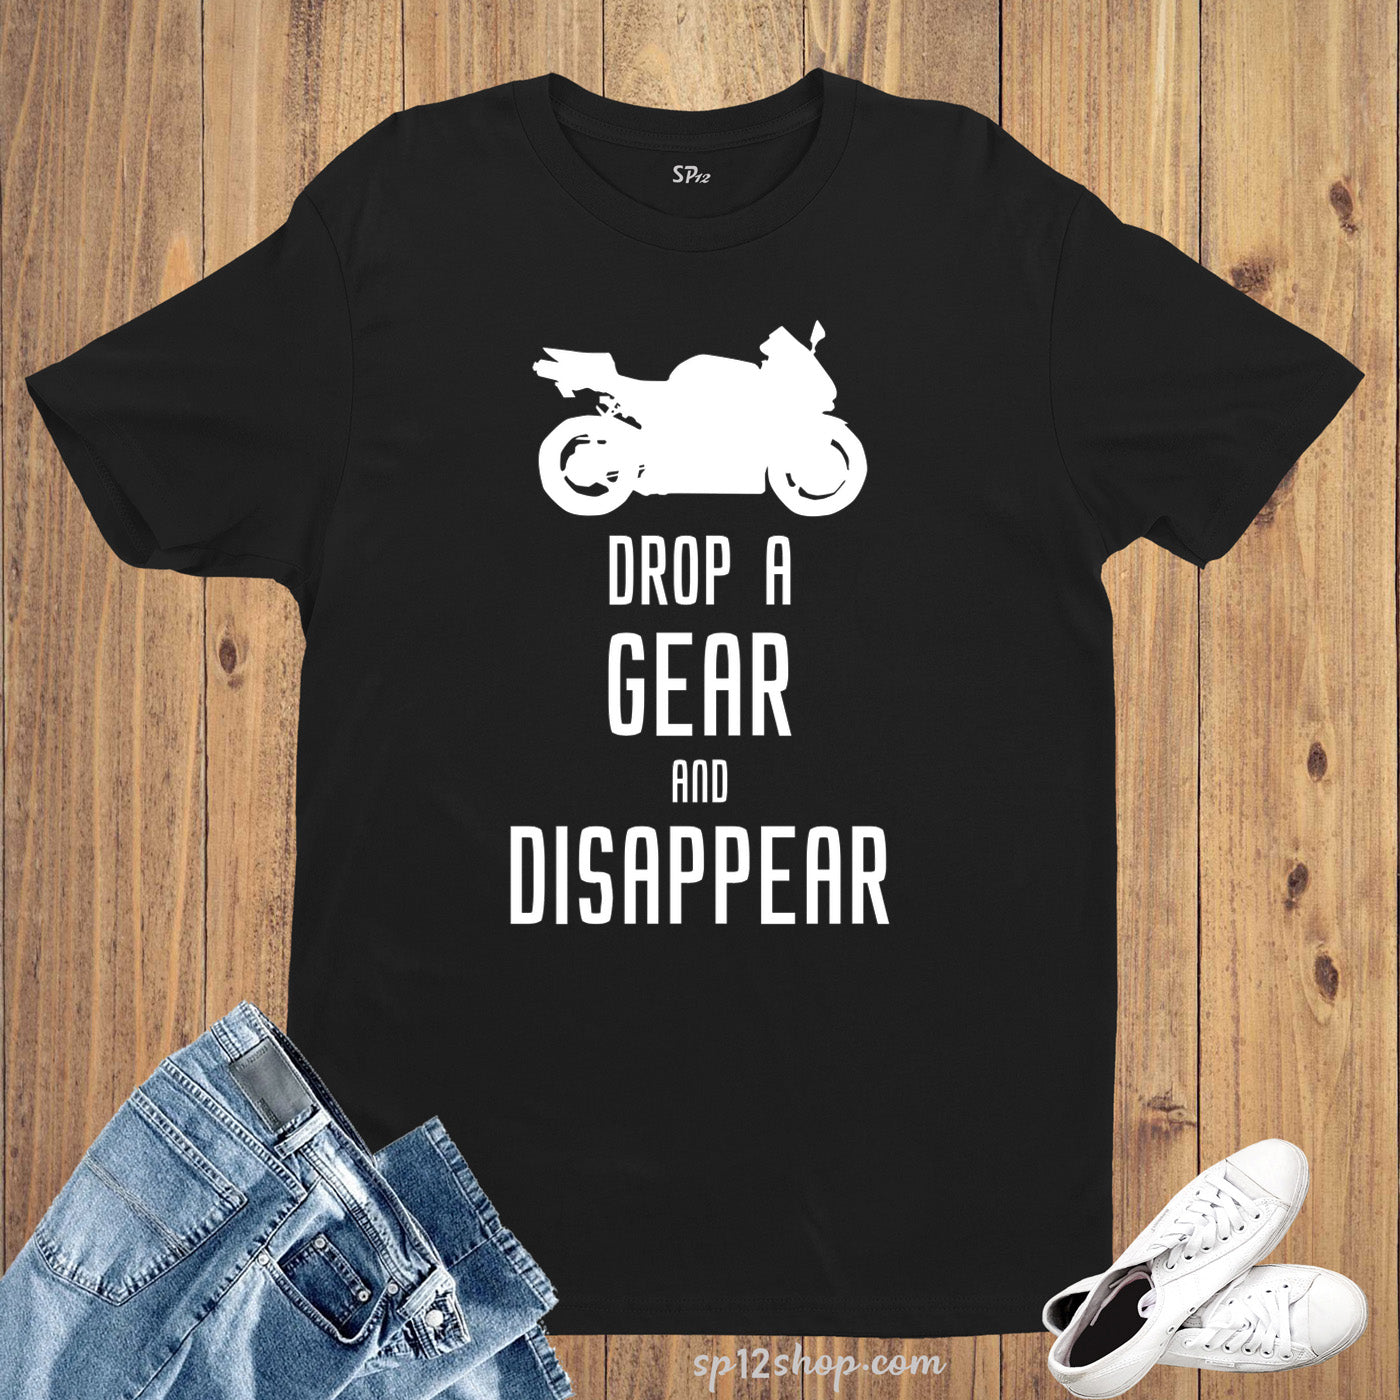 Hobby T Shirt Drop A Gear Disappear Motorcycle Bikers